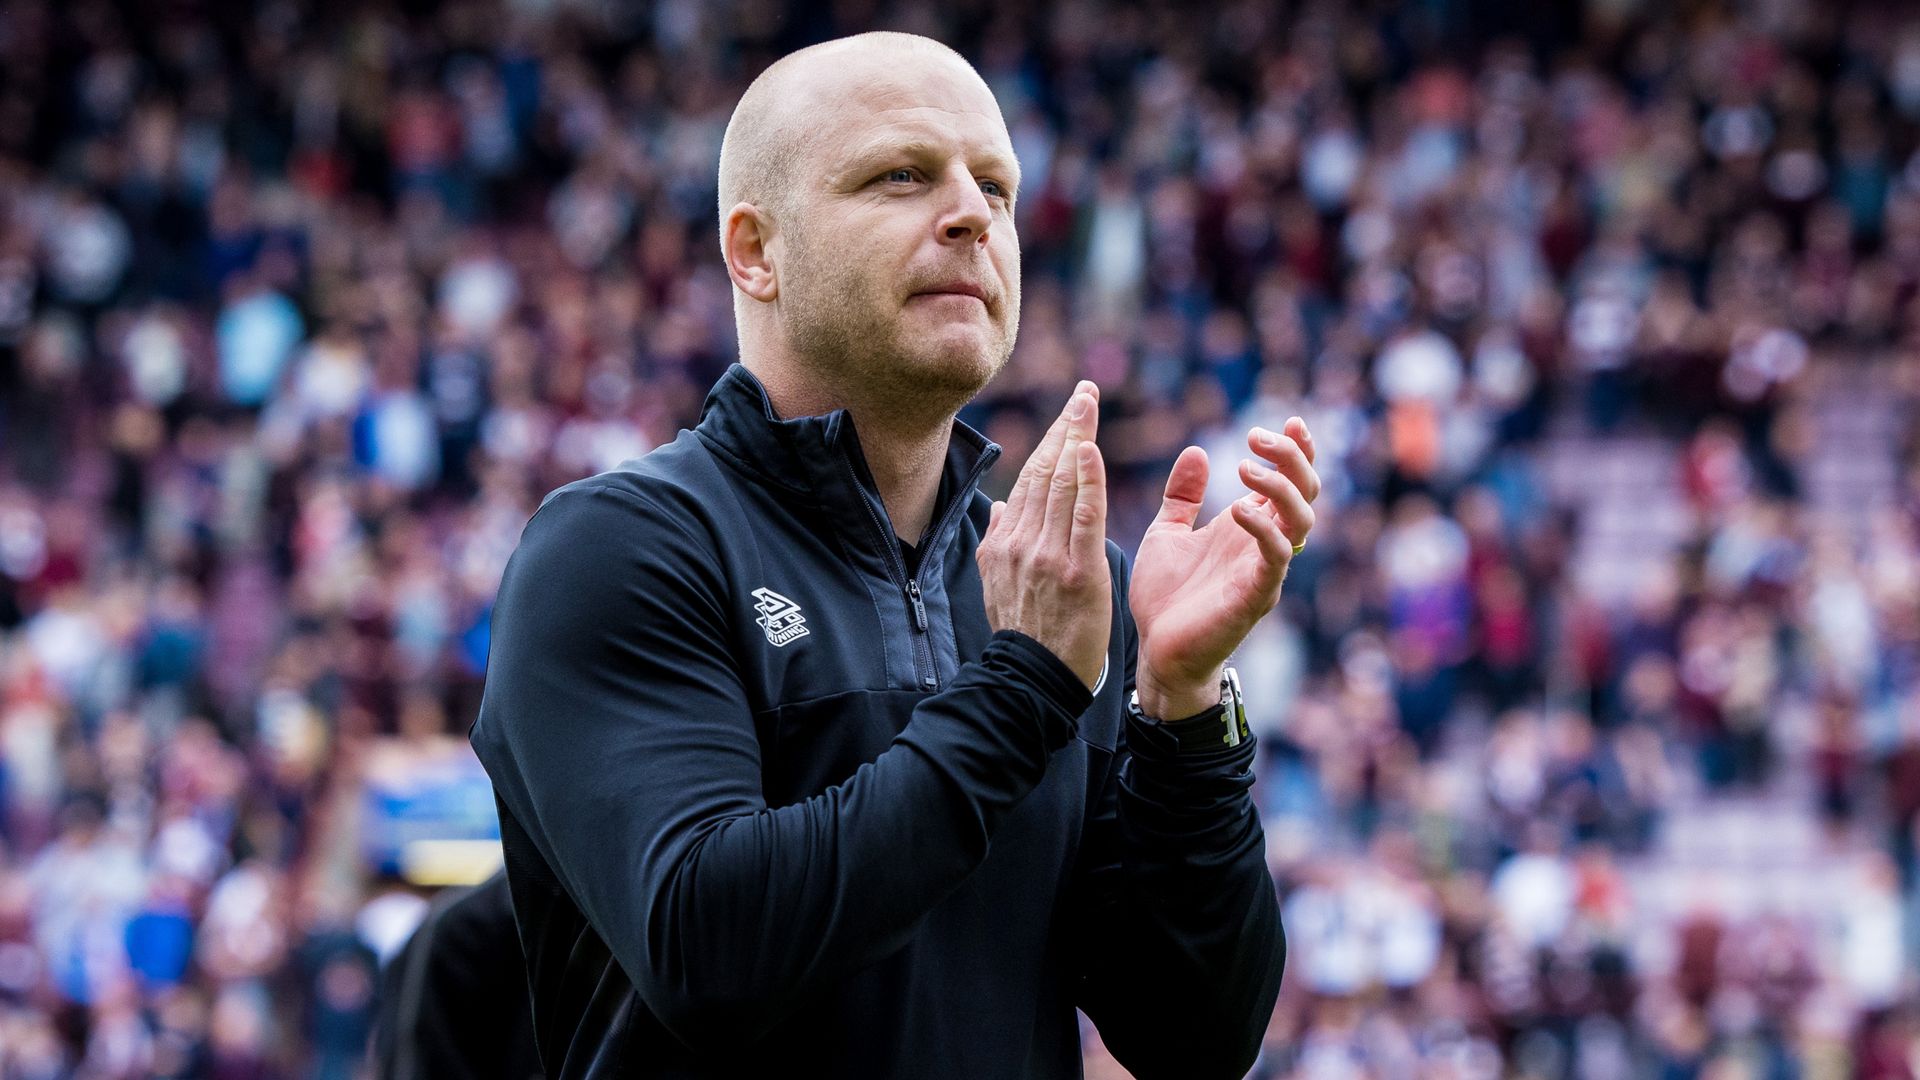 Naismith stays at Hearts as technical director with McAvoy head coach